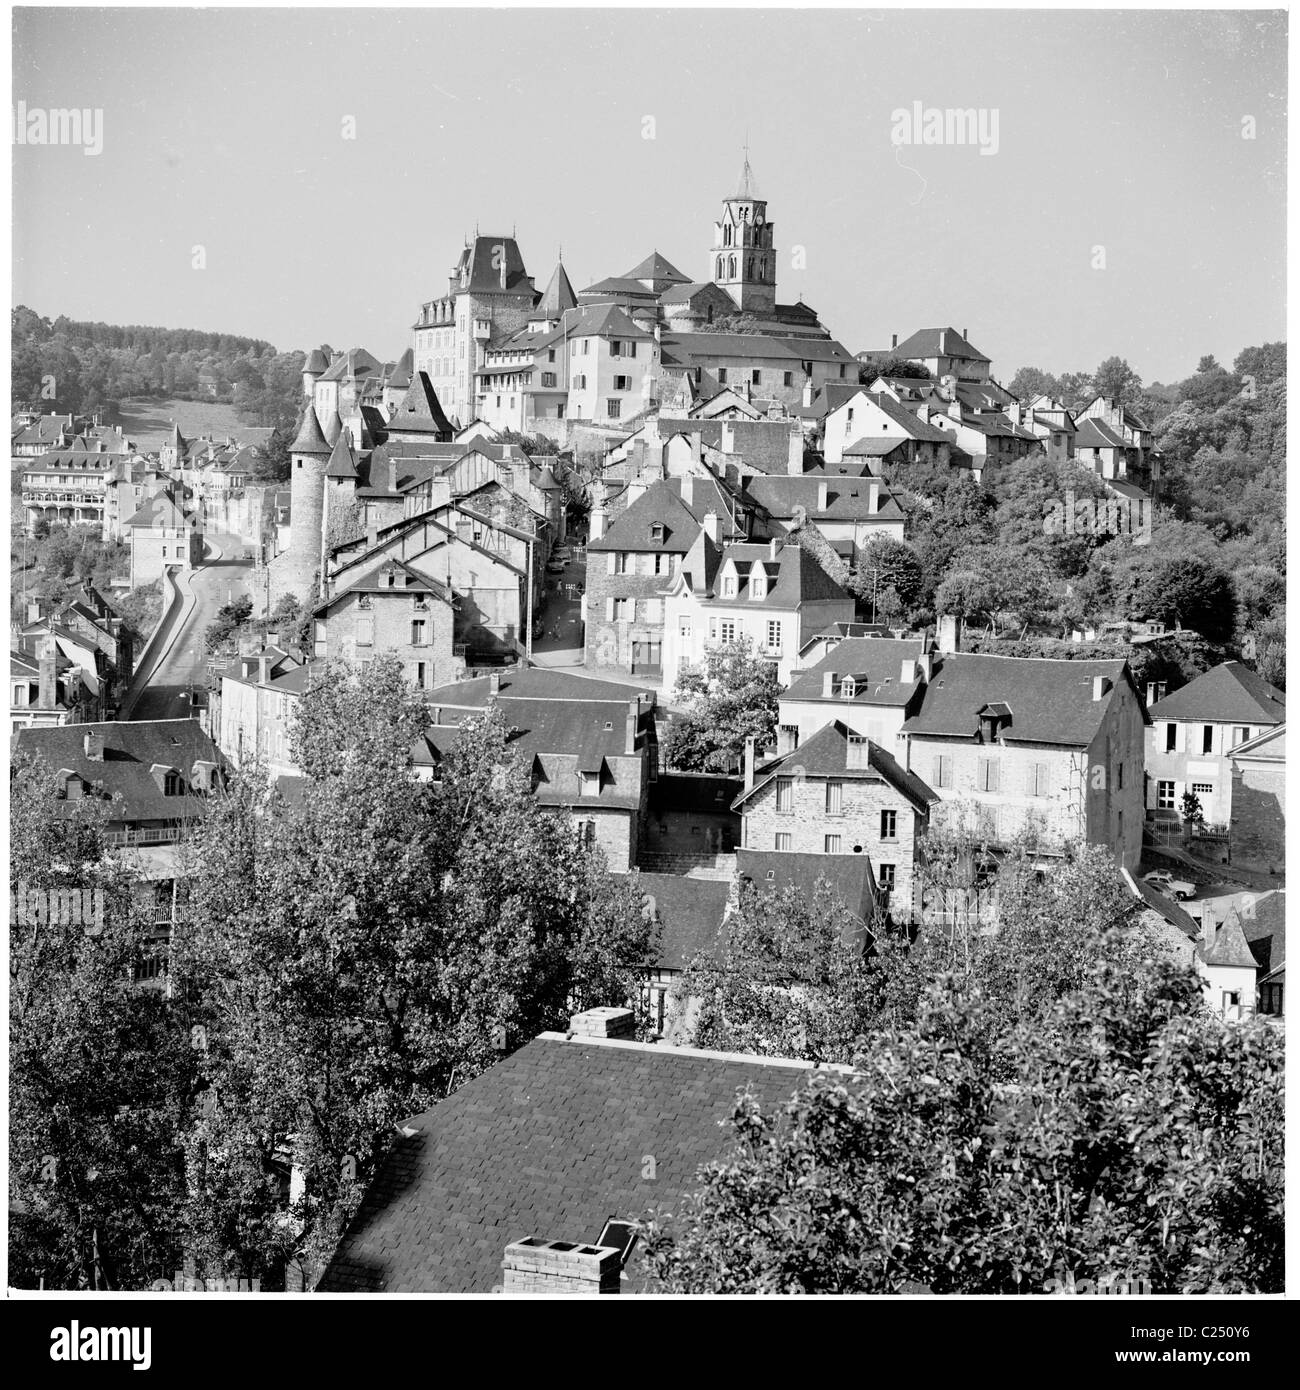 1950s, historical, view over the ancient buildings and rooftops of Uzerche, France. The medieval town is known as 'the pearl of the Limousin'. Stock Photo